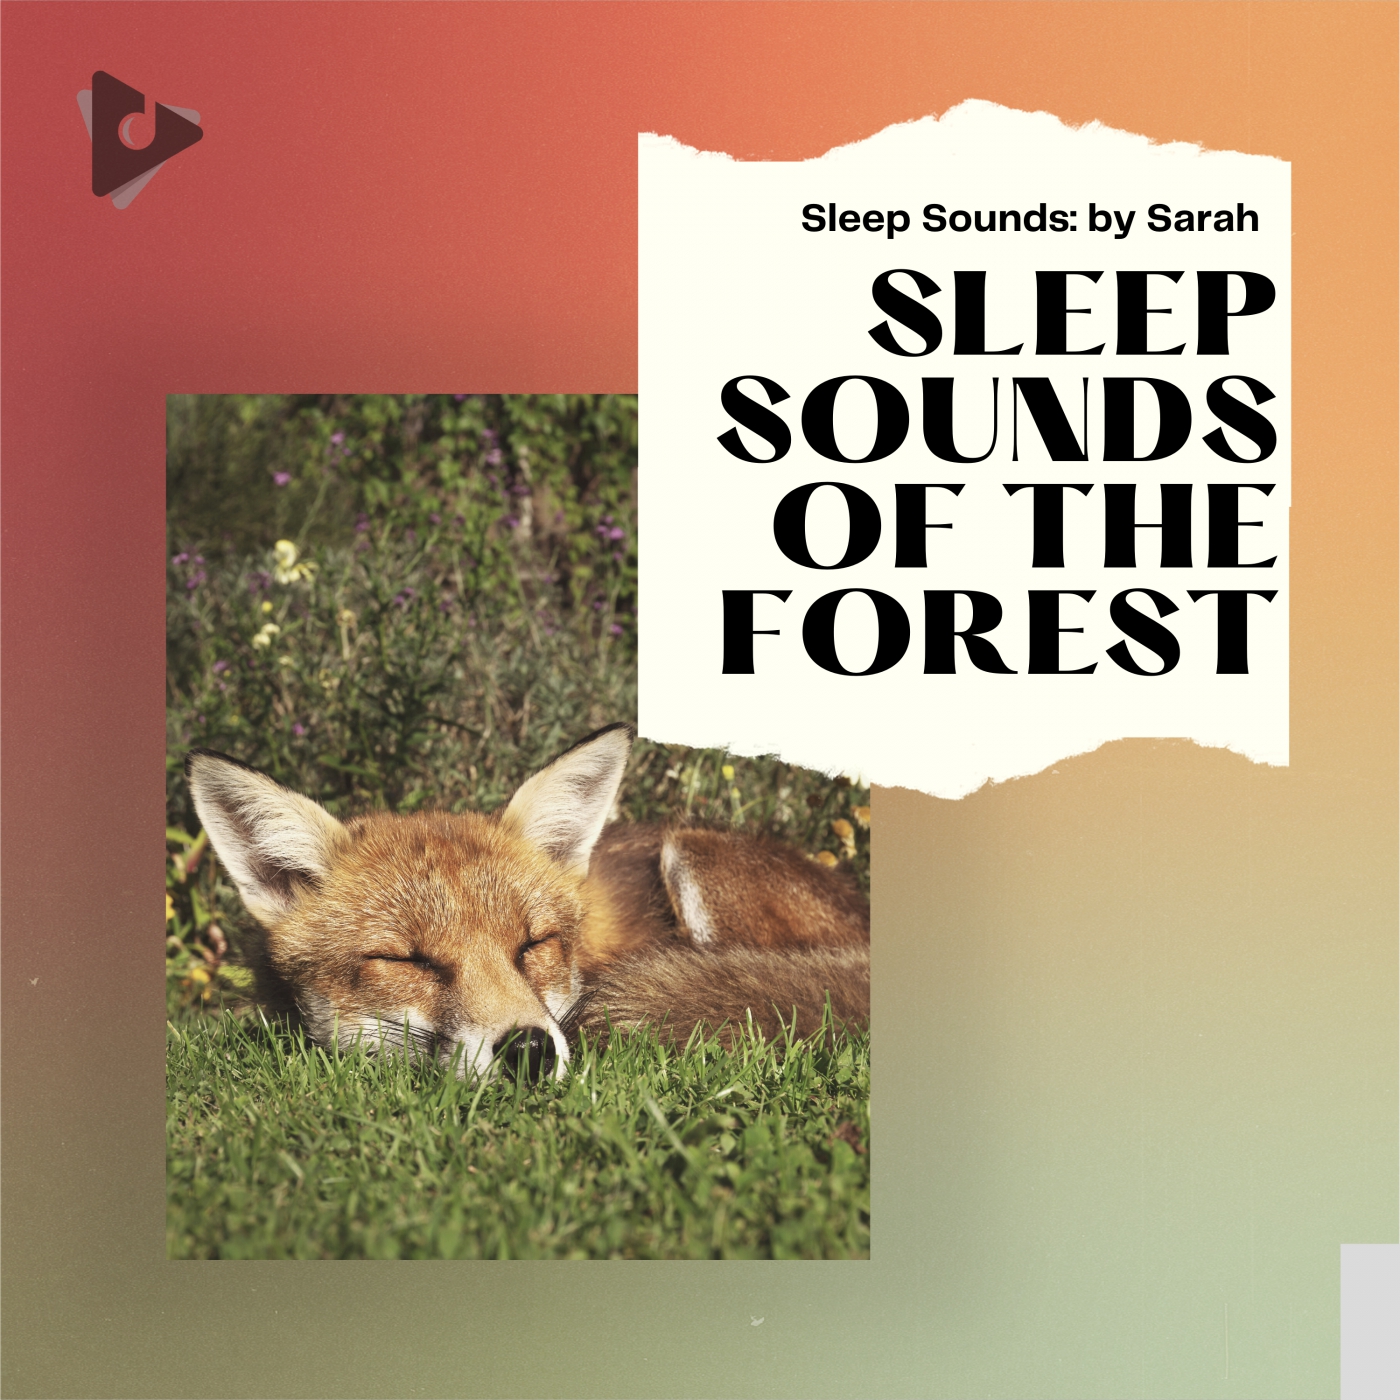 Sleep Sounds of The Forest